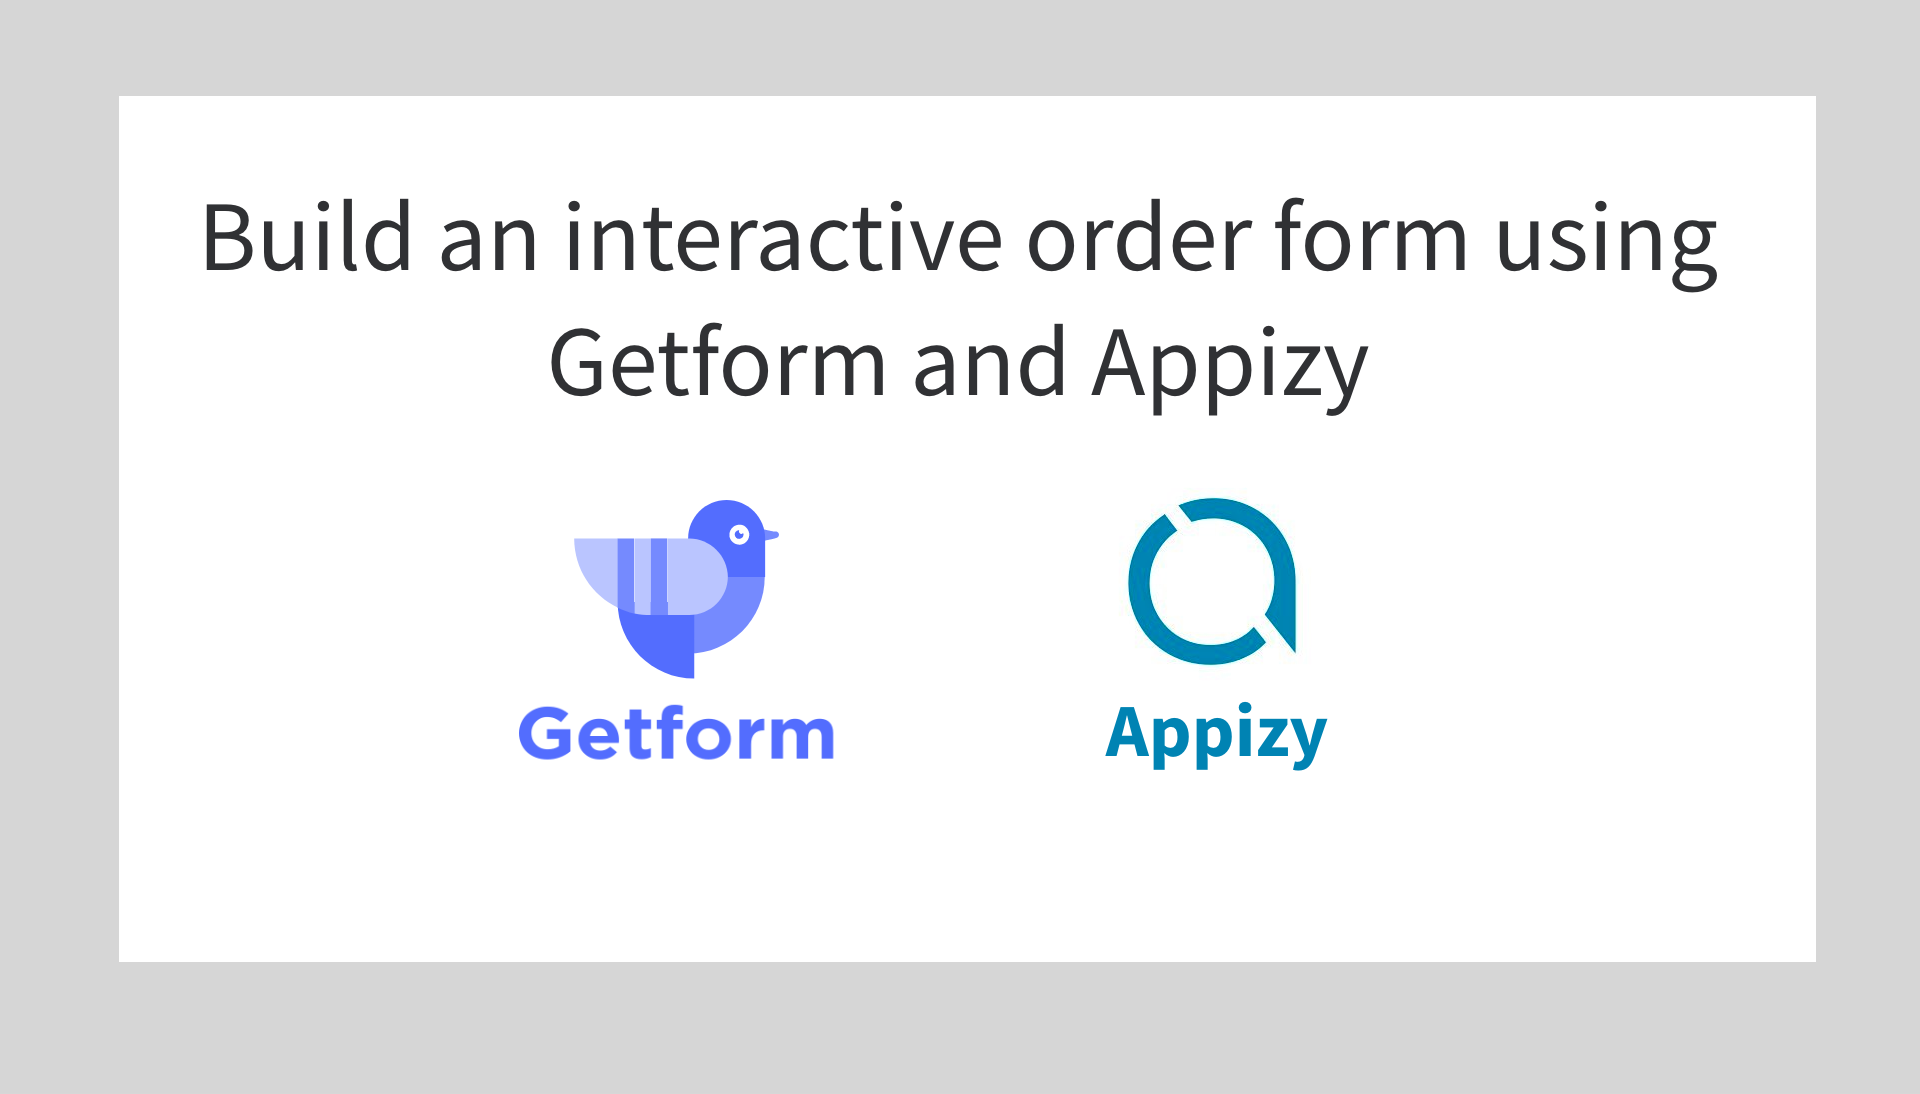 How to build an interactive form using Getform and Appizy